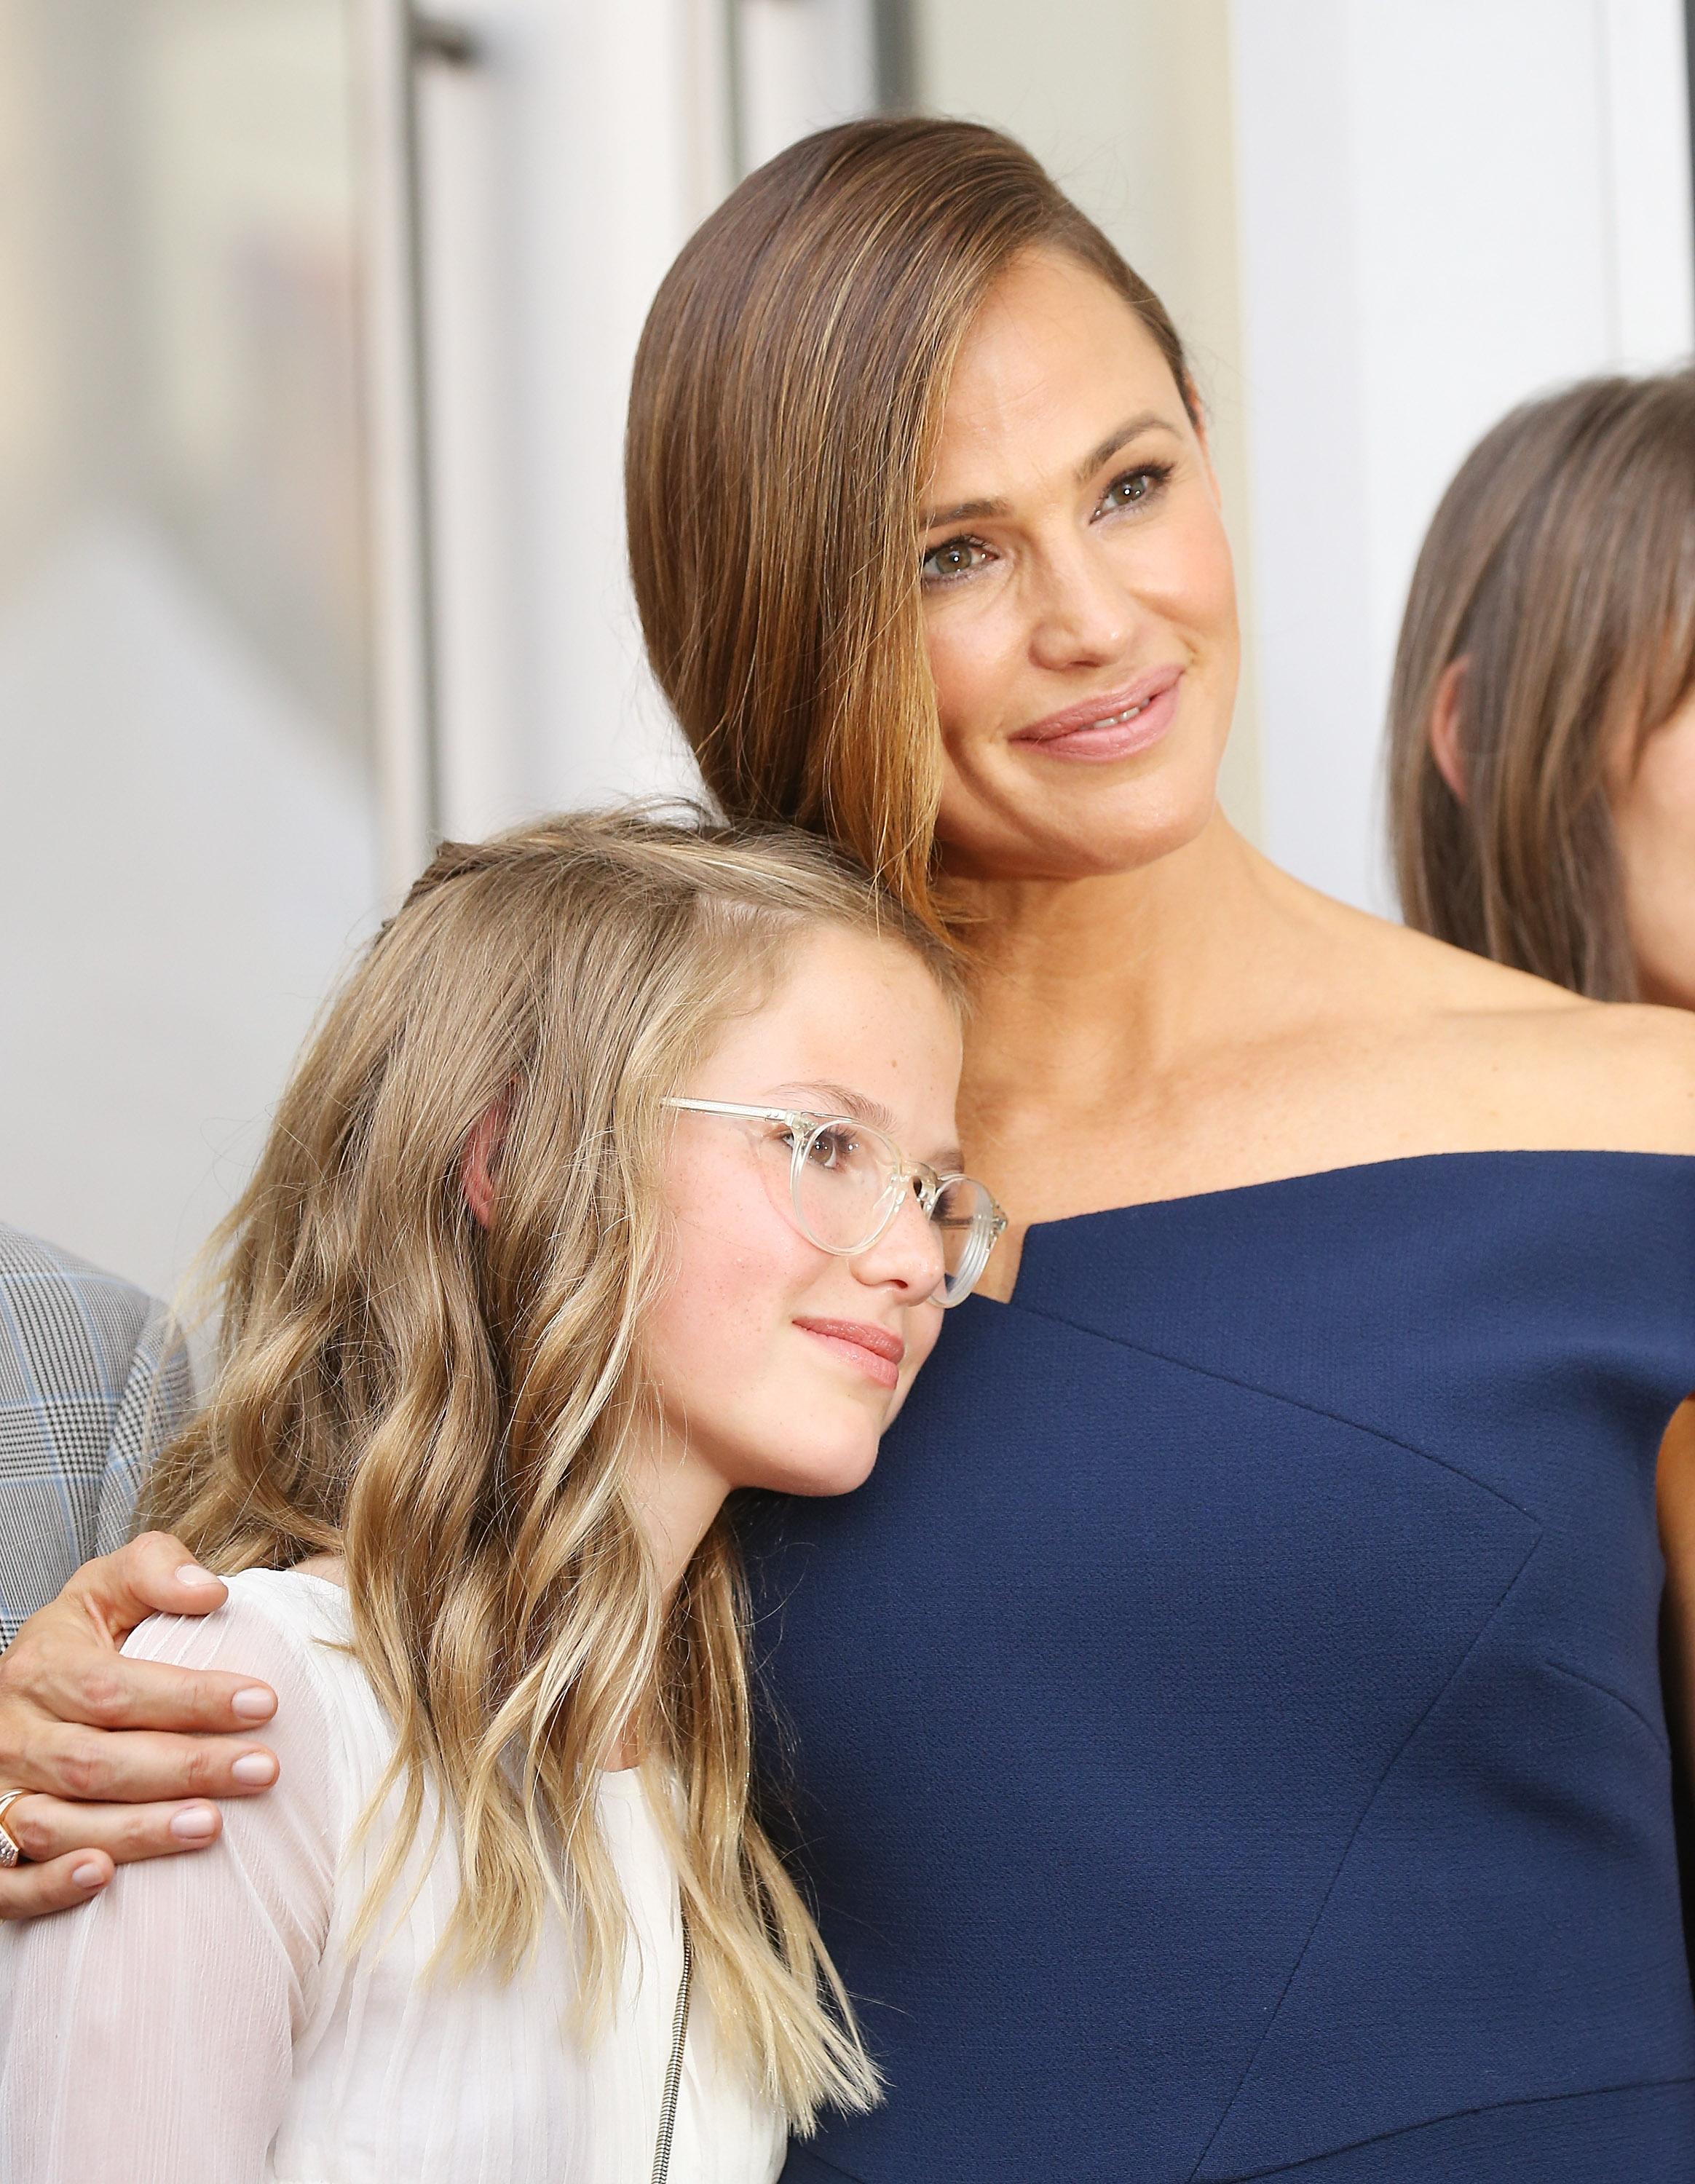  Jennifer Garner and her daughter, Violet Affleck attend the ceremony honoring Jennifer Garner with a Star on The Hollywood Walk of Fame held on August 20, 2018 in Hollywood, California. | Source: Getty Images